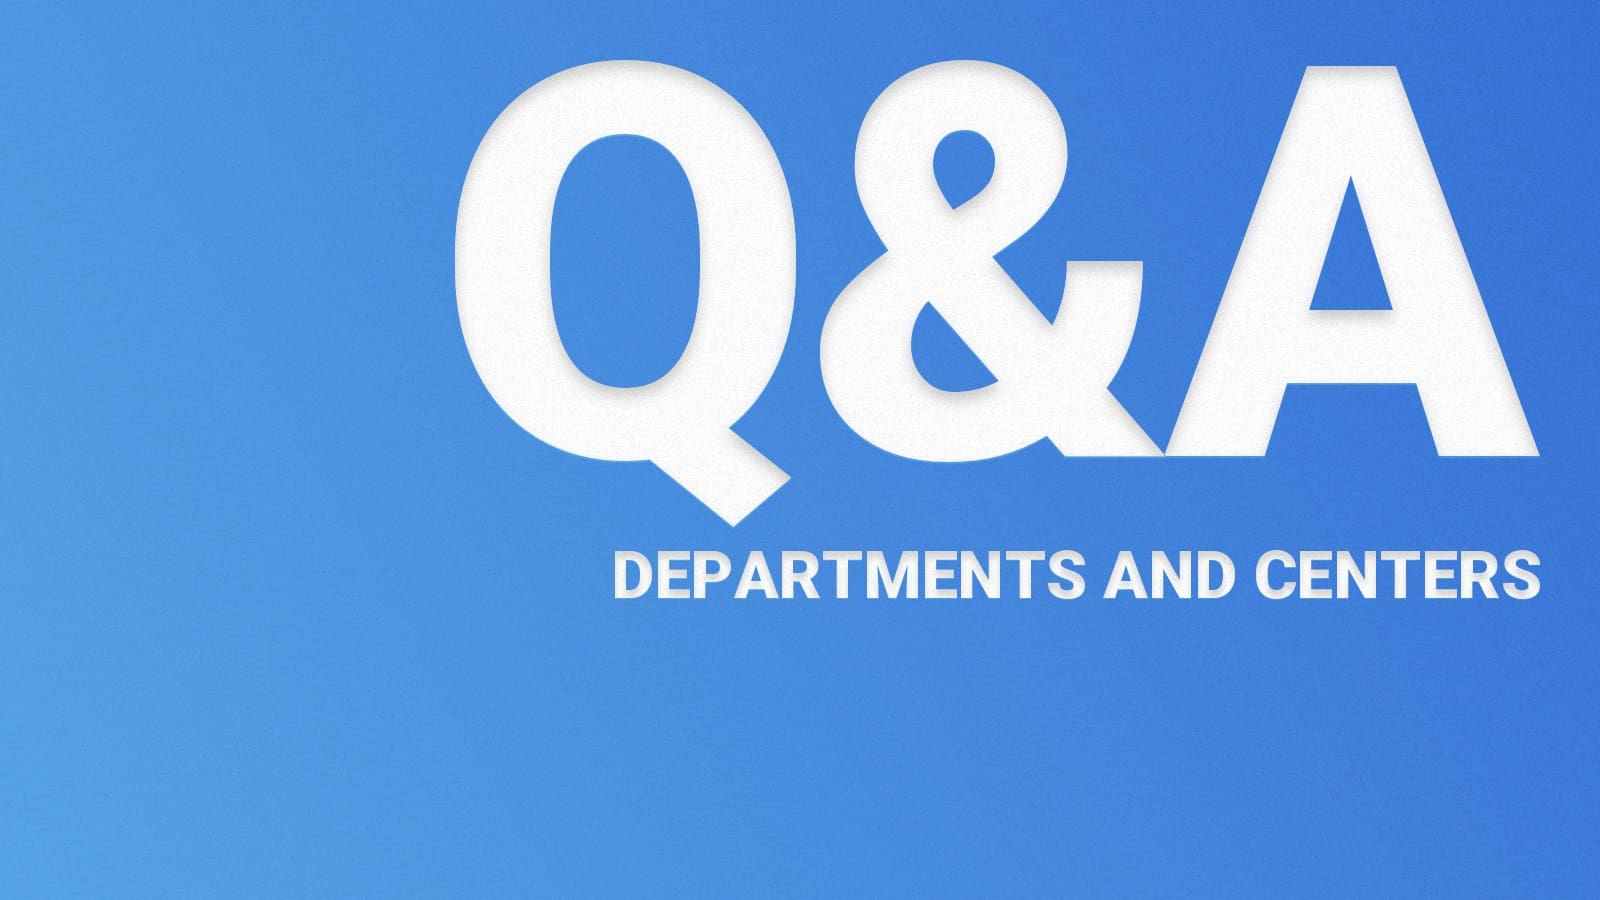 Graphic with the letters "Q&amp;A" and the words "Departments and Centers"